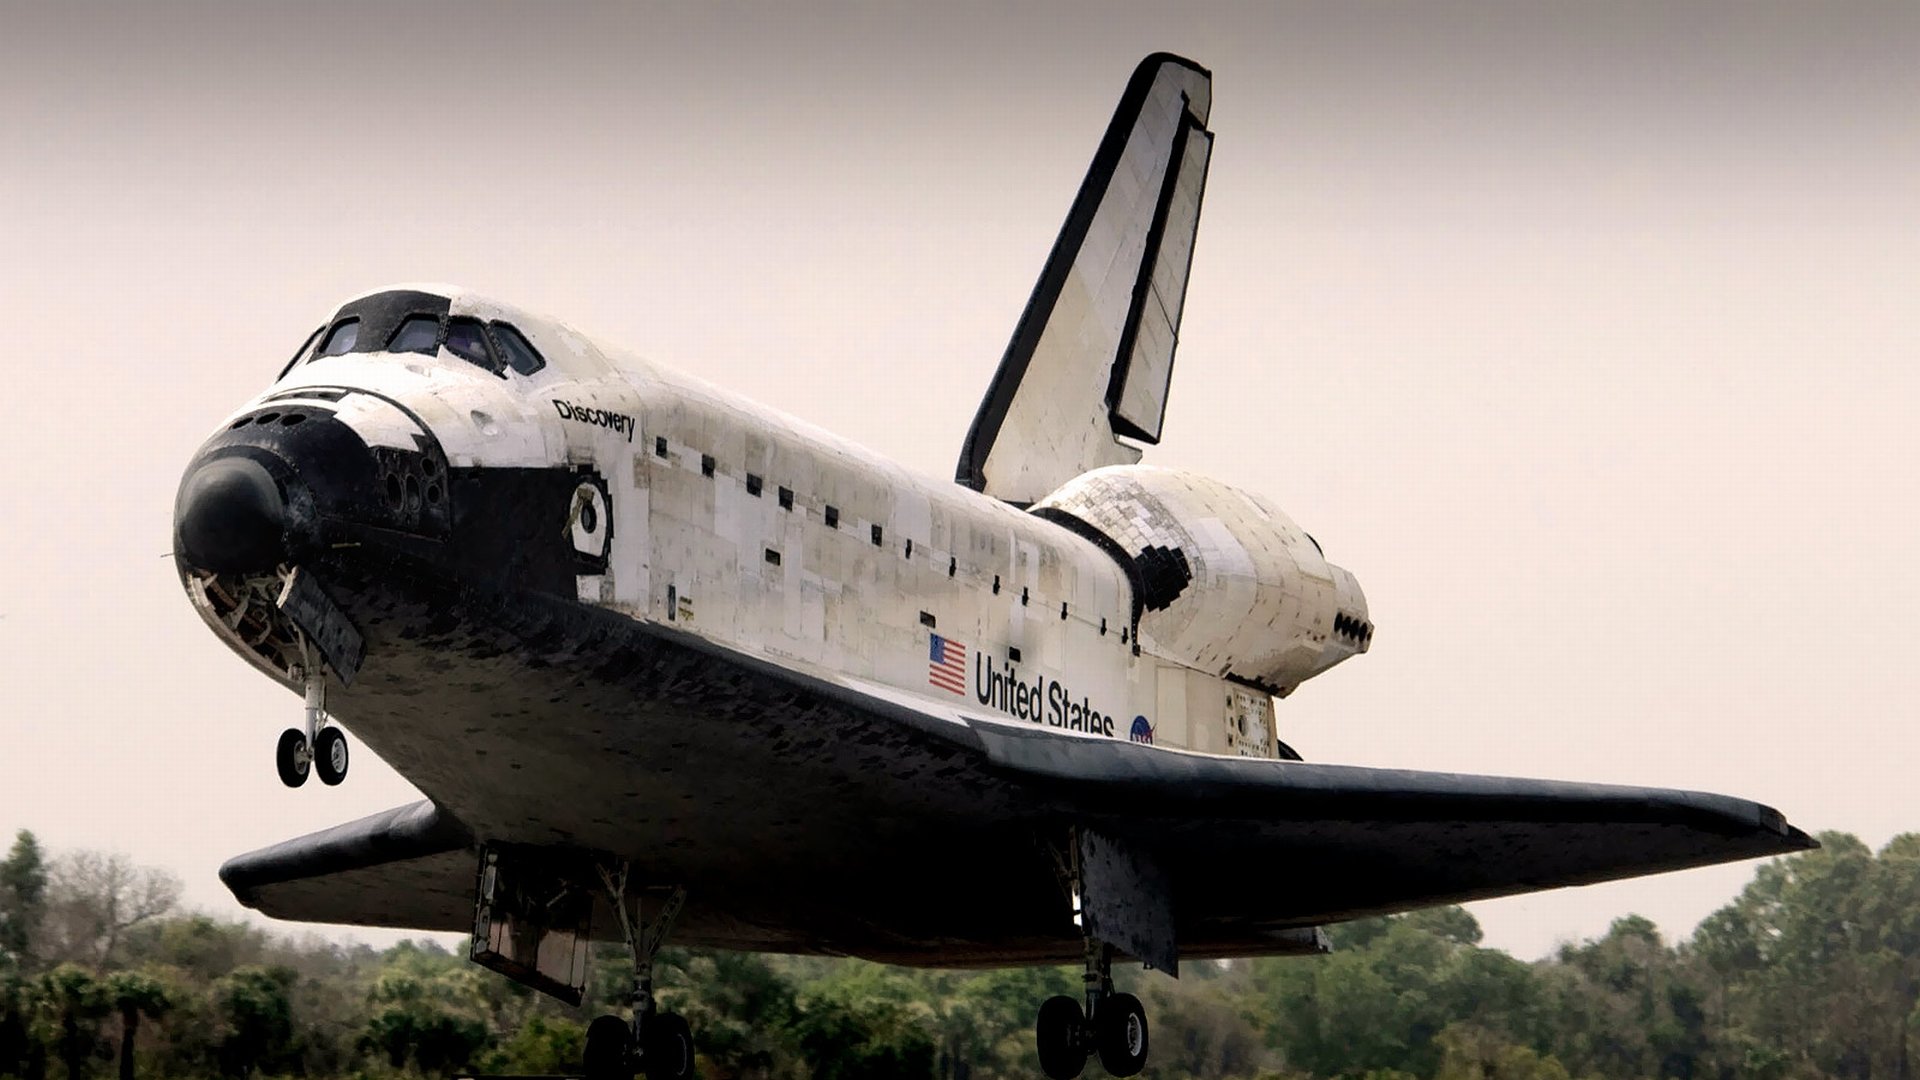 Free Space Shuttle Discovery high quality wallpaper ID:419719 for hd 1920x1080 desktop